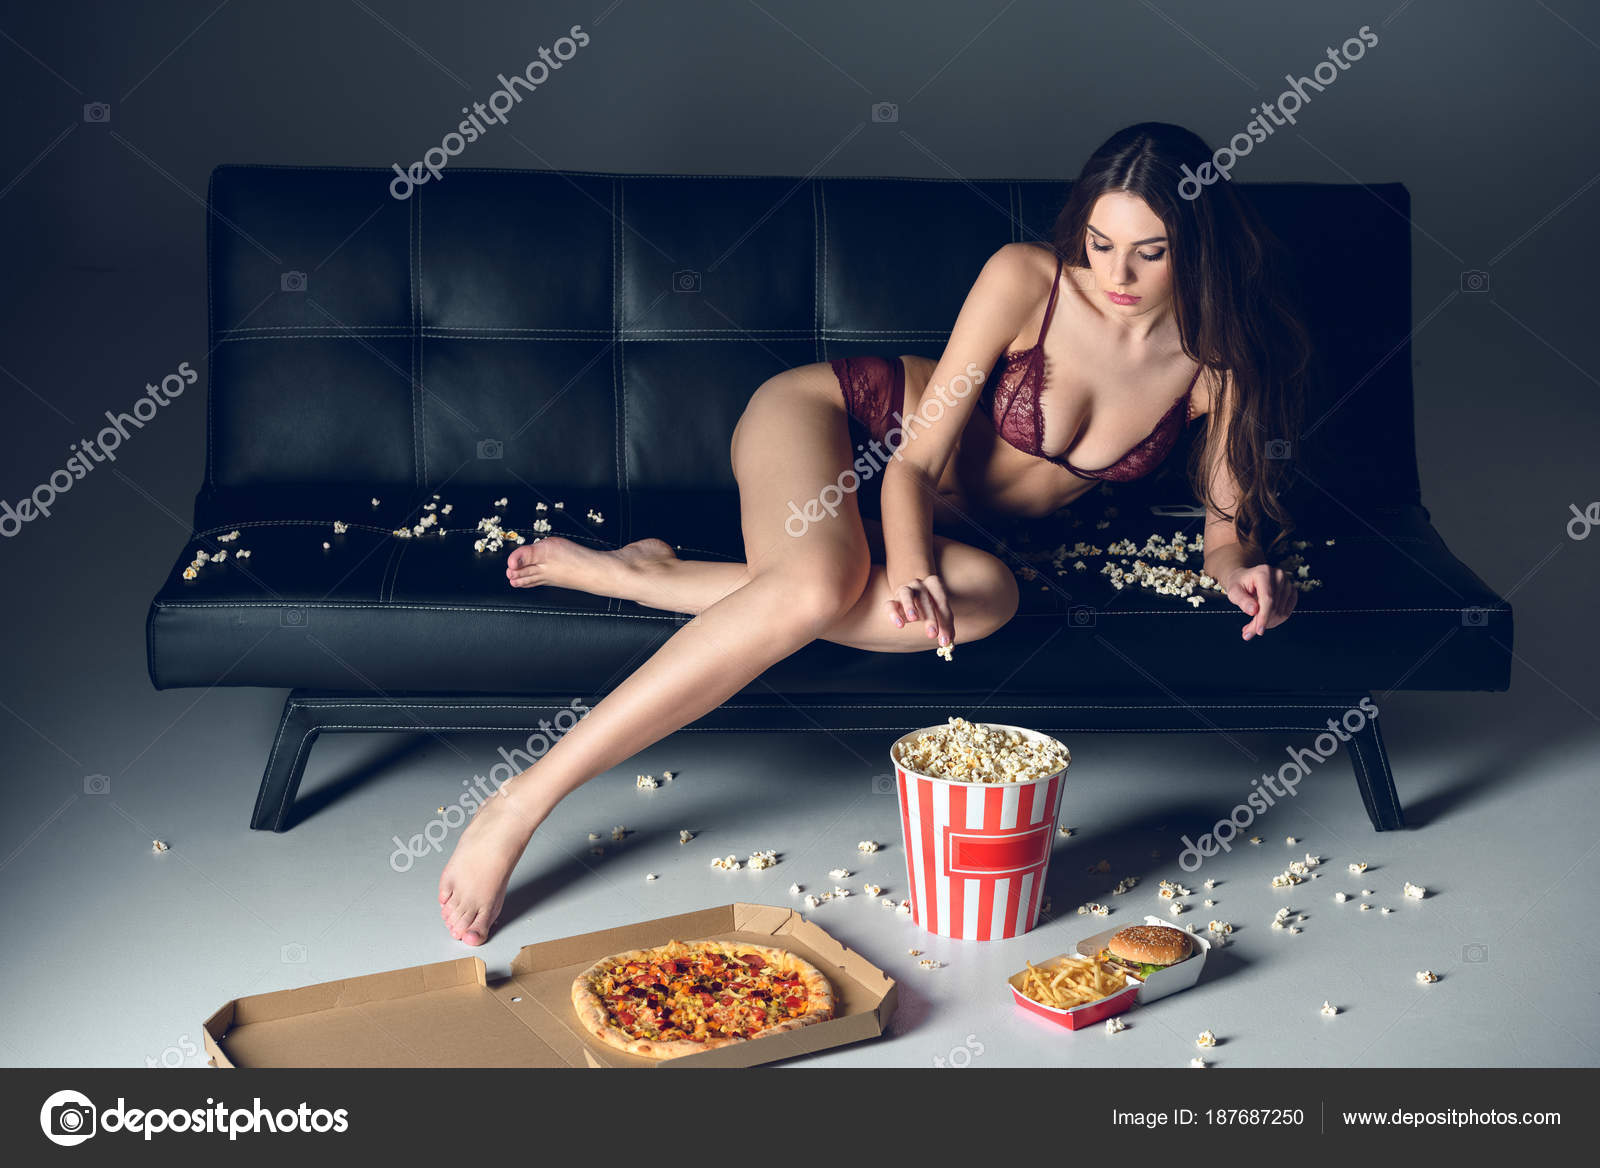 Sexy Girl Lying Sofa Lace Lingerie Eating Popcorn Stock Photo